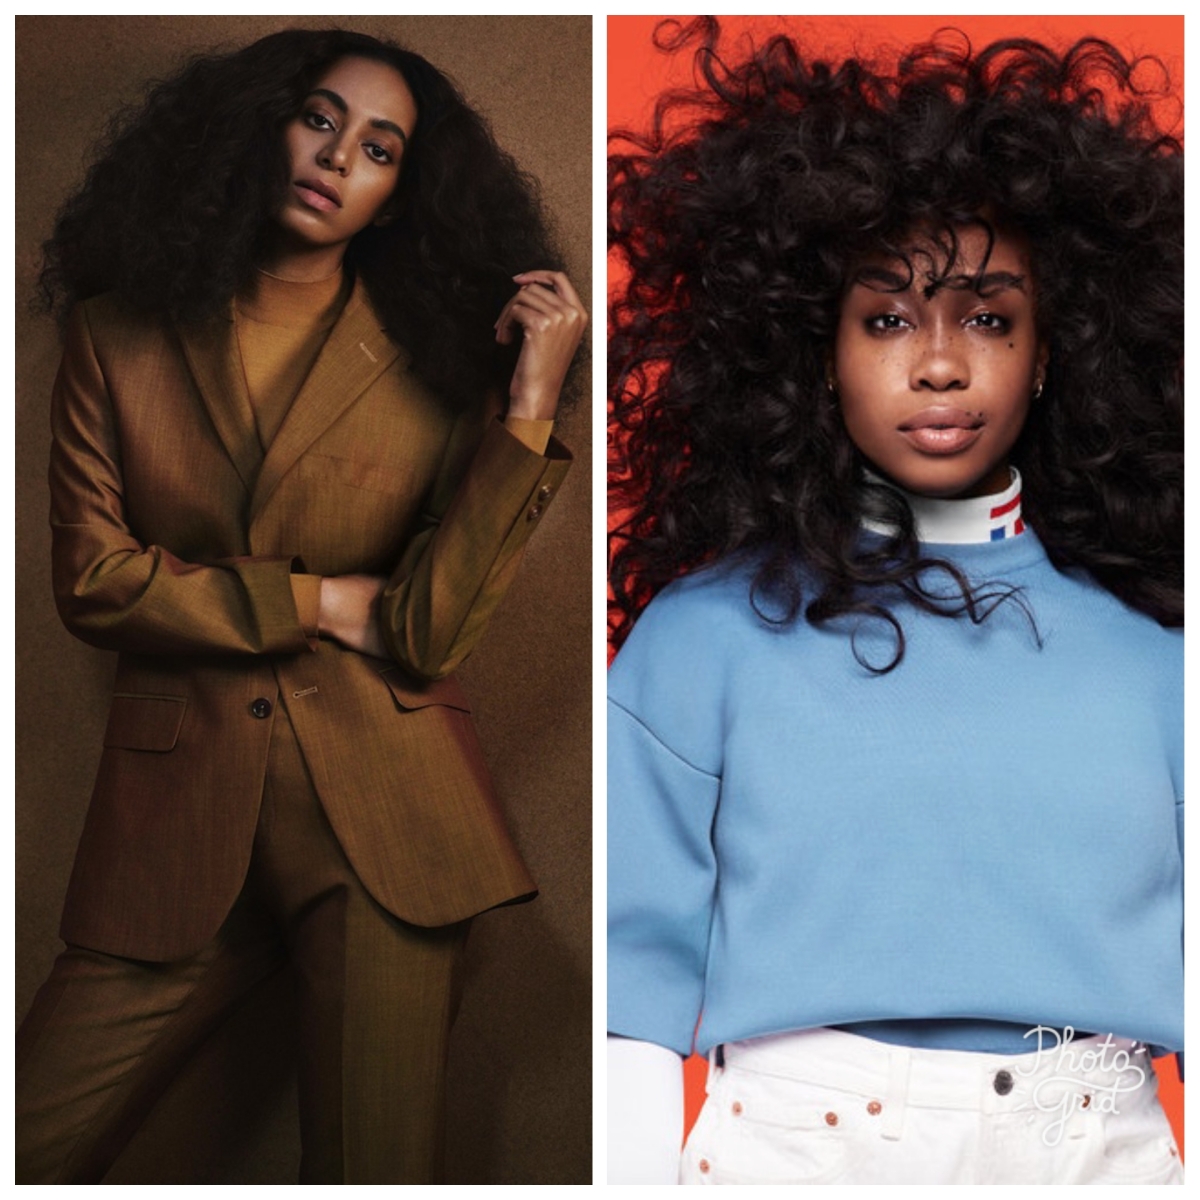 #BlackGirlMagic! Solange Knowles to Direct Sza’s (@sza) “The Weekend” Music Video!